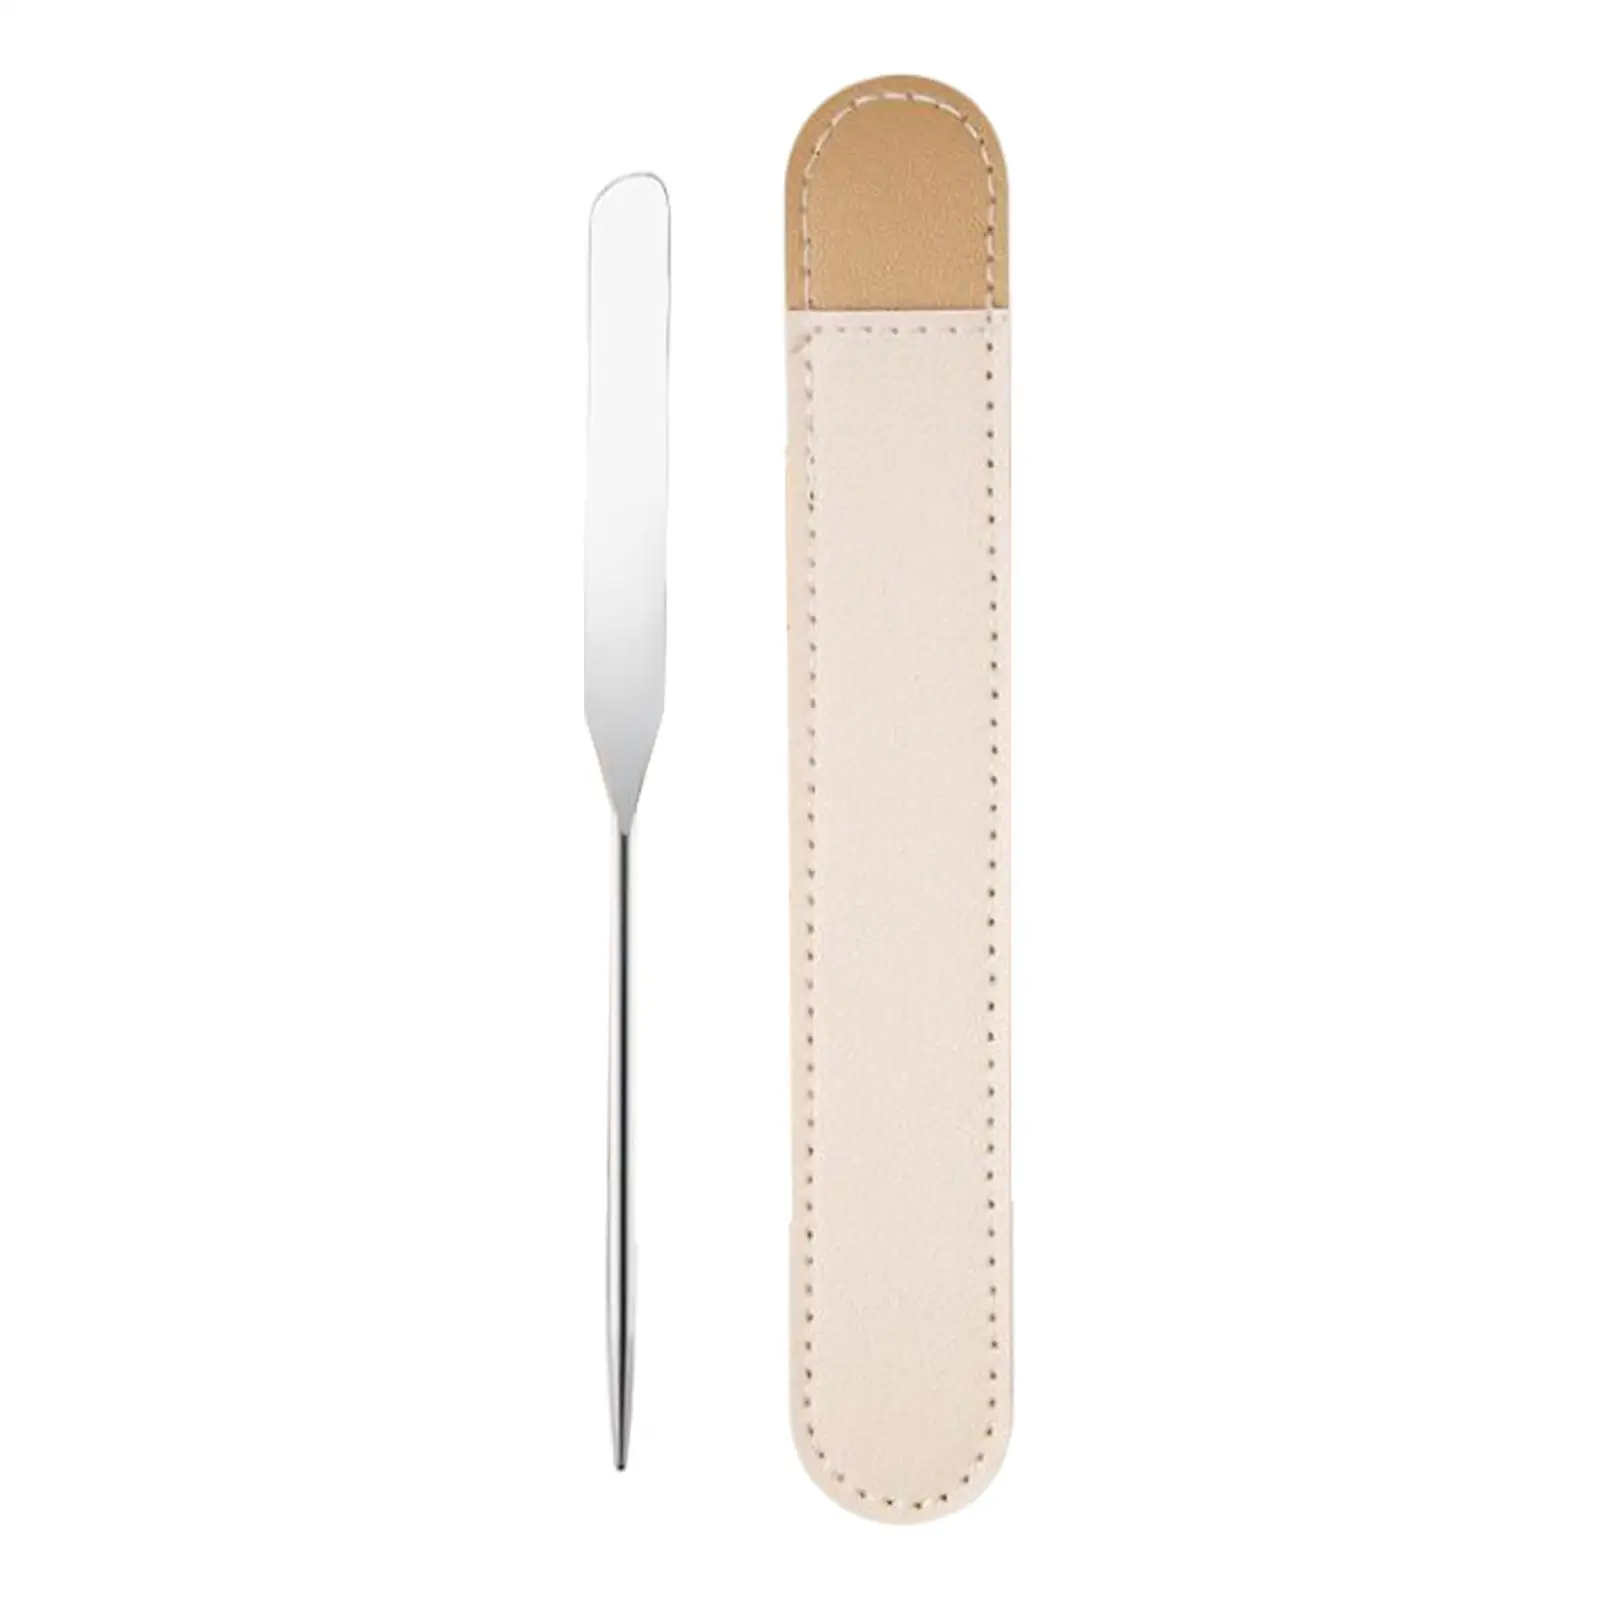 durable Spatula with Storage Bag Blending Mixing for Cream Salon Lipstick Blush